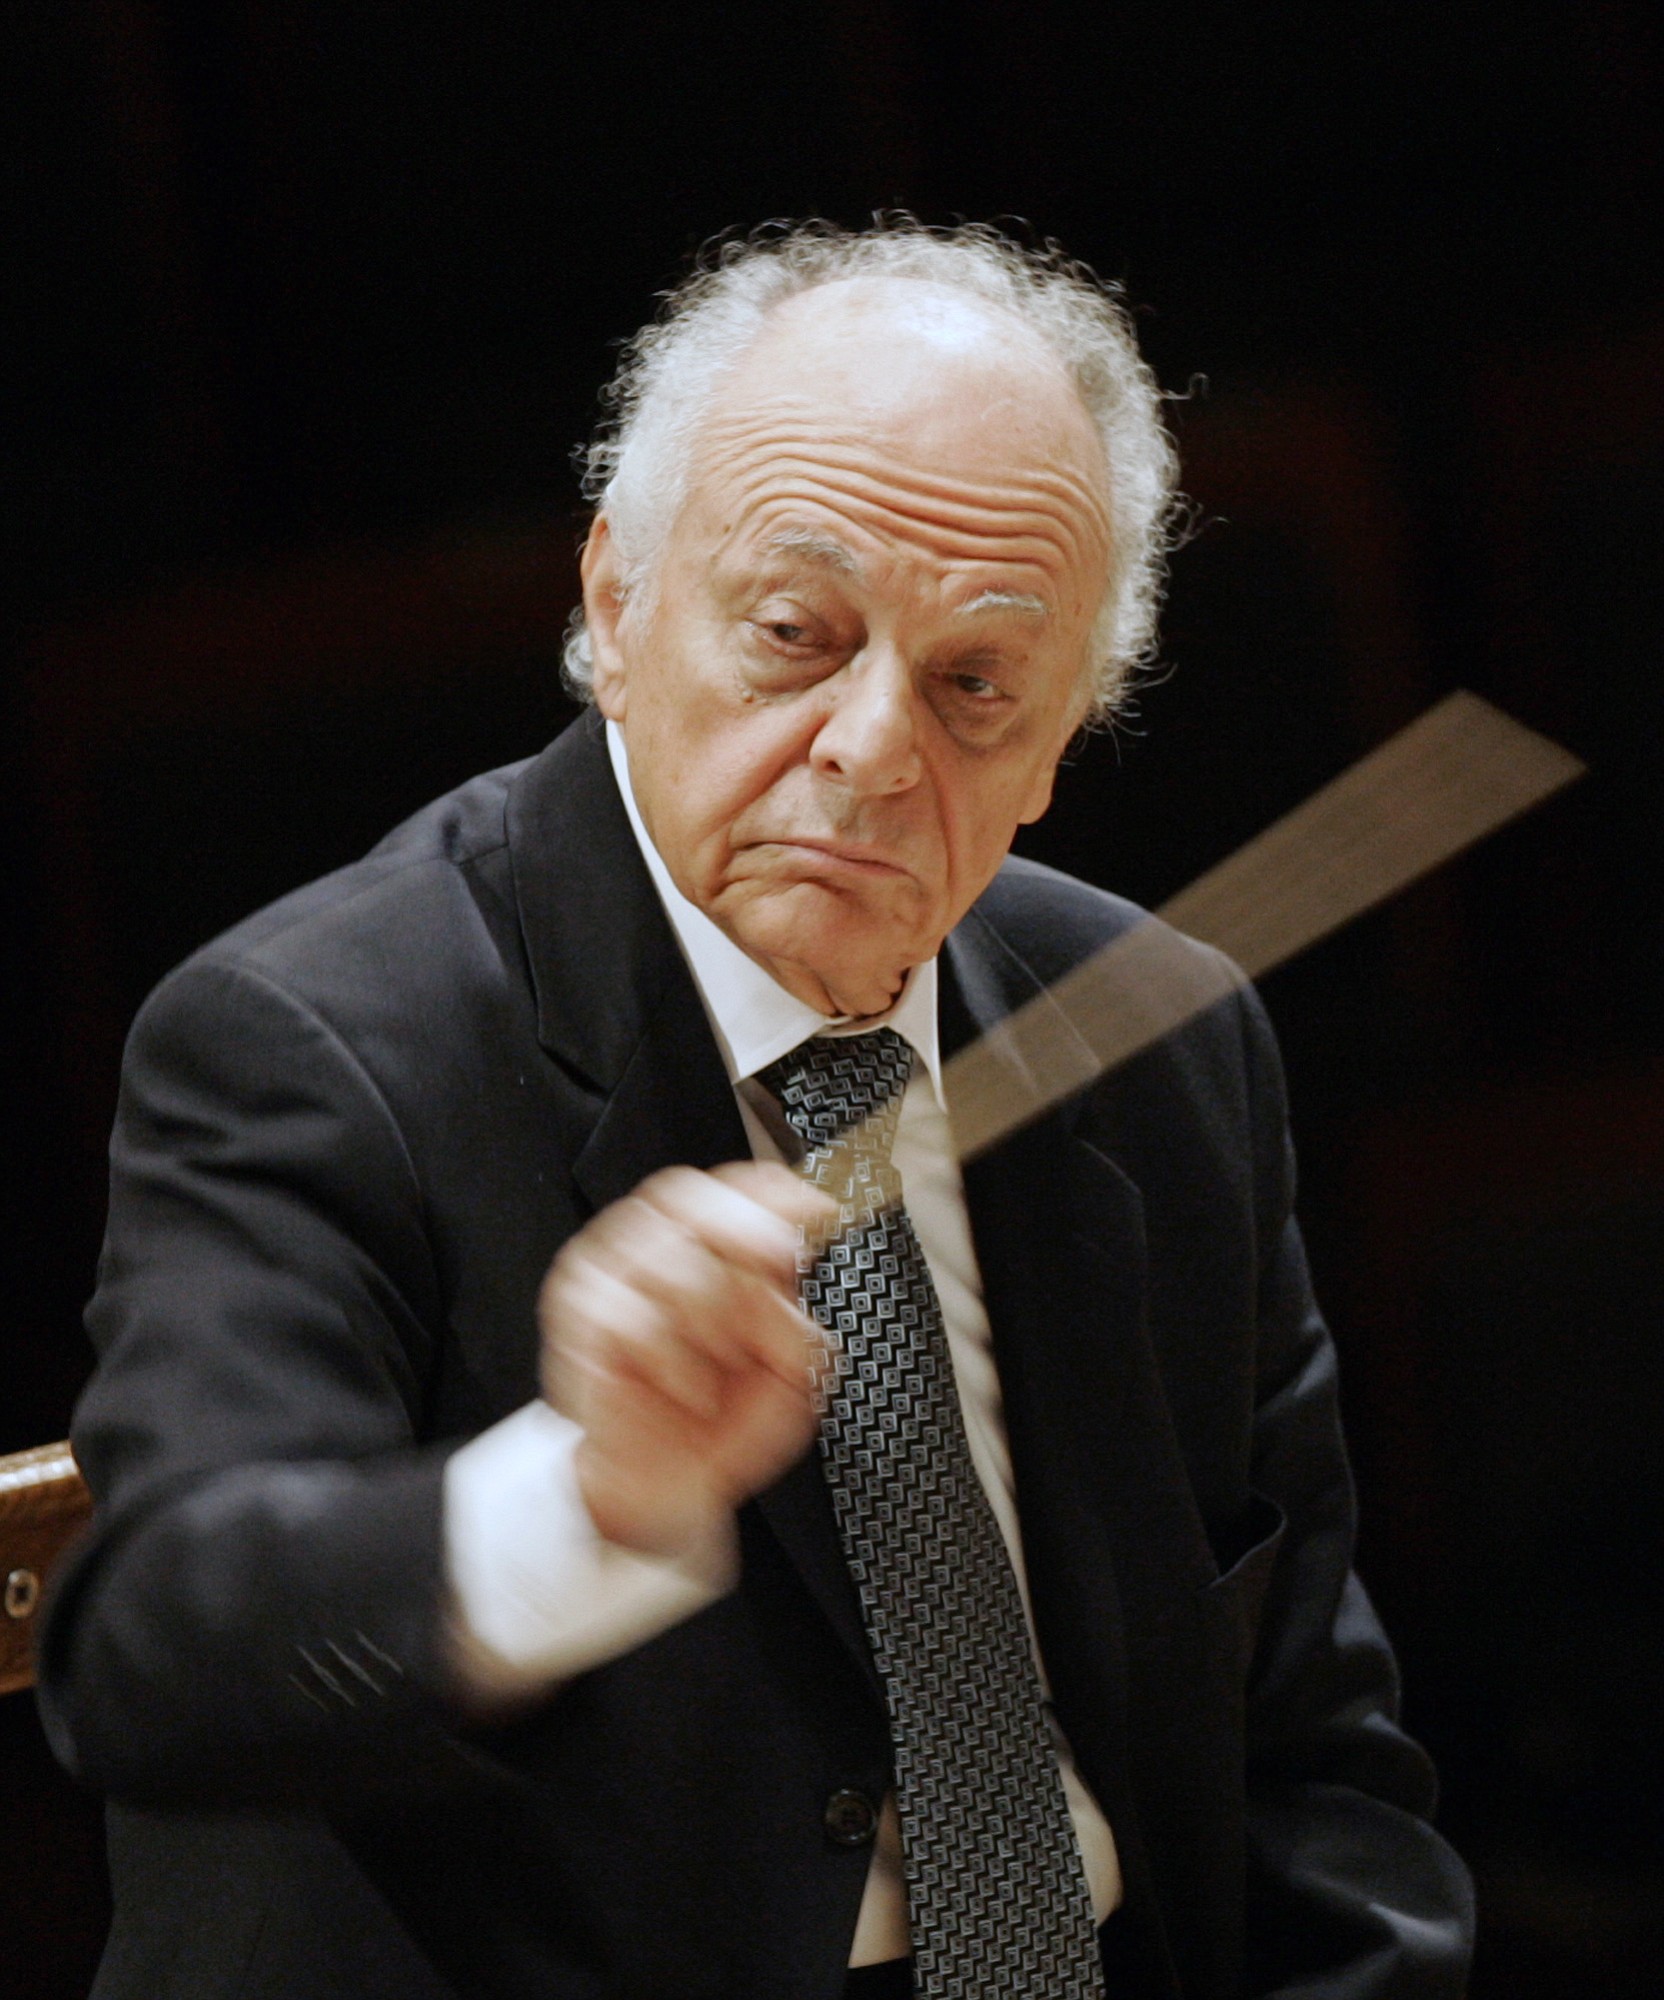 Lorin Maazel, whose prodigious career included seven years at the helm of the New York Philharmonic, died Sunday at his home in Virginia from complications following pneumonia.